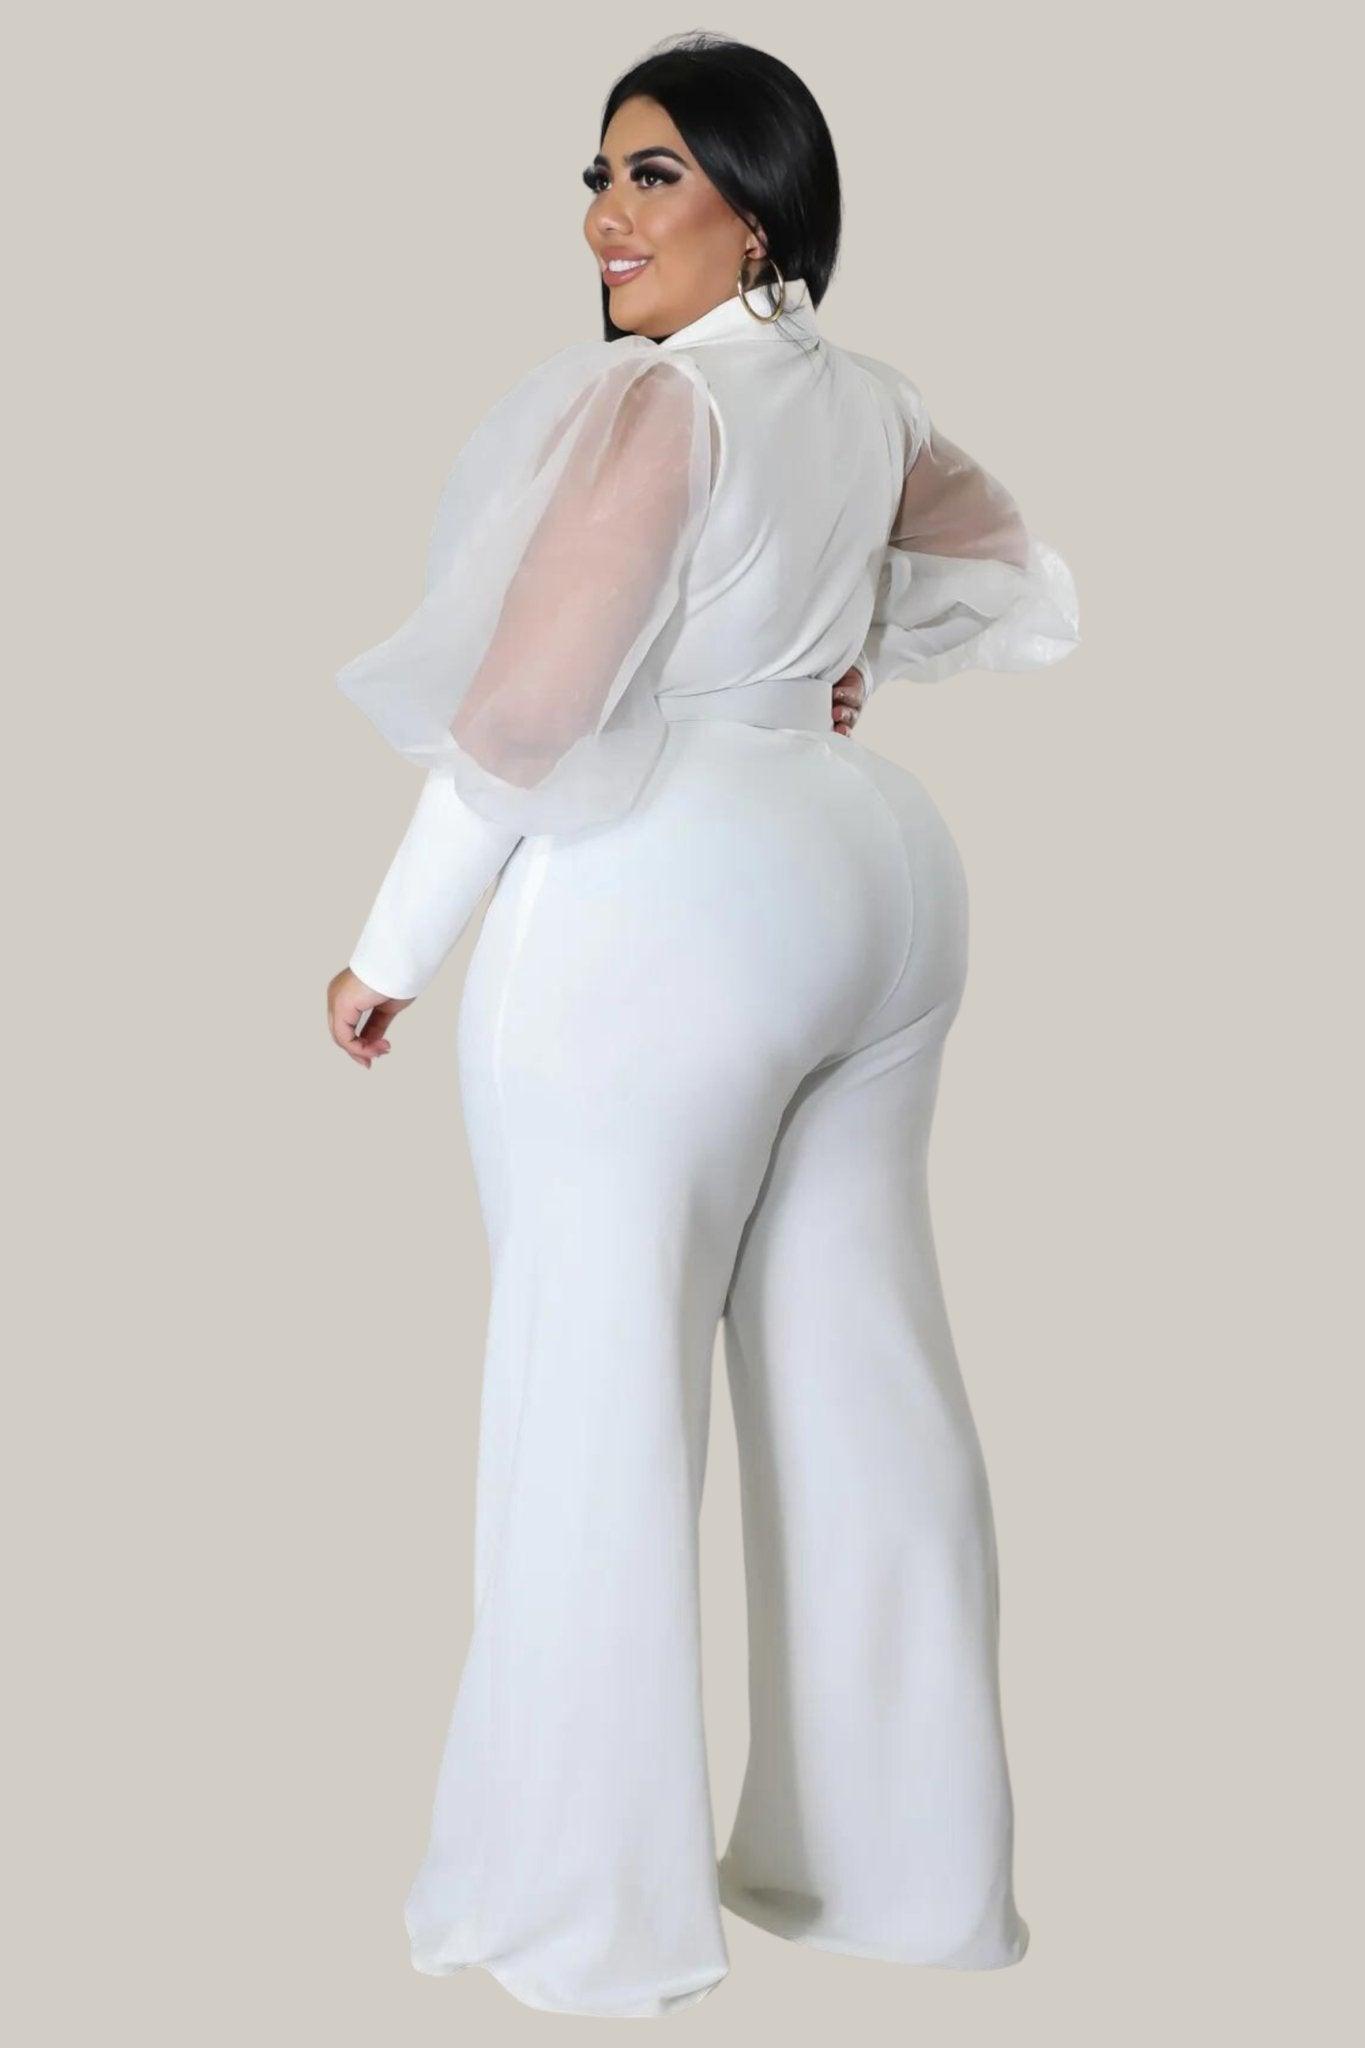 Kiana Puff Sleeves Belted Jumpsuit - MY SEXY STYLES